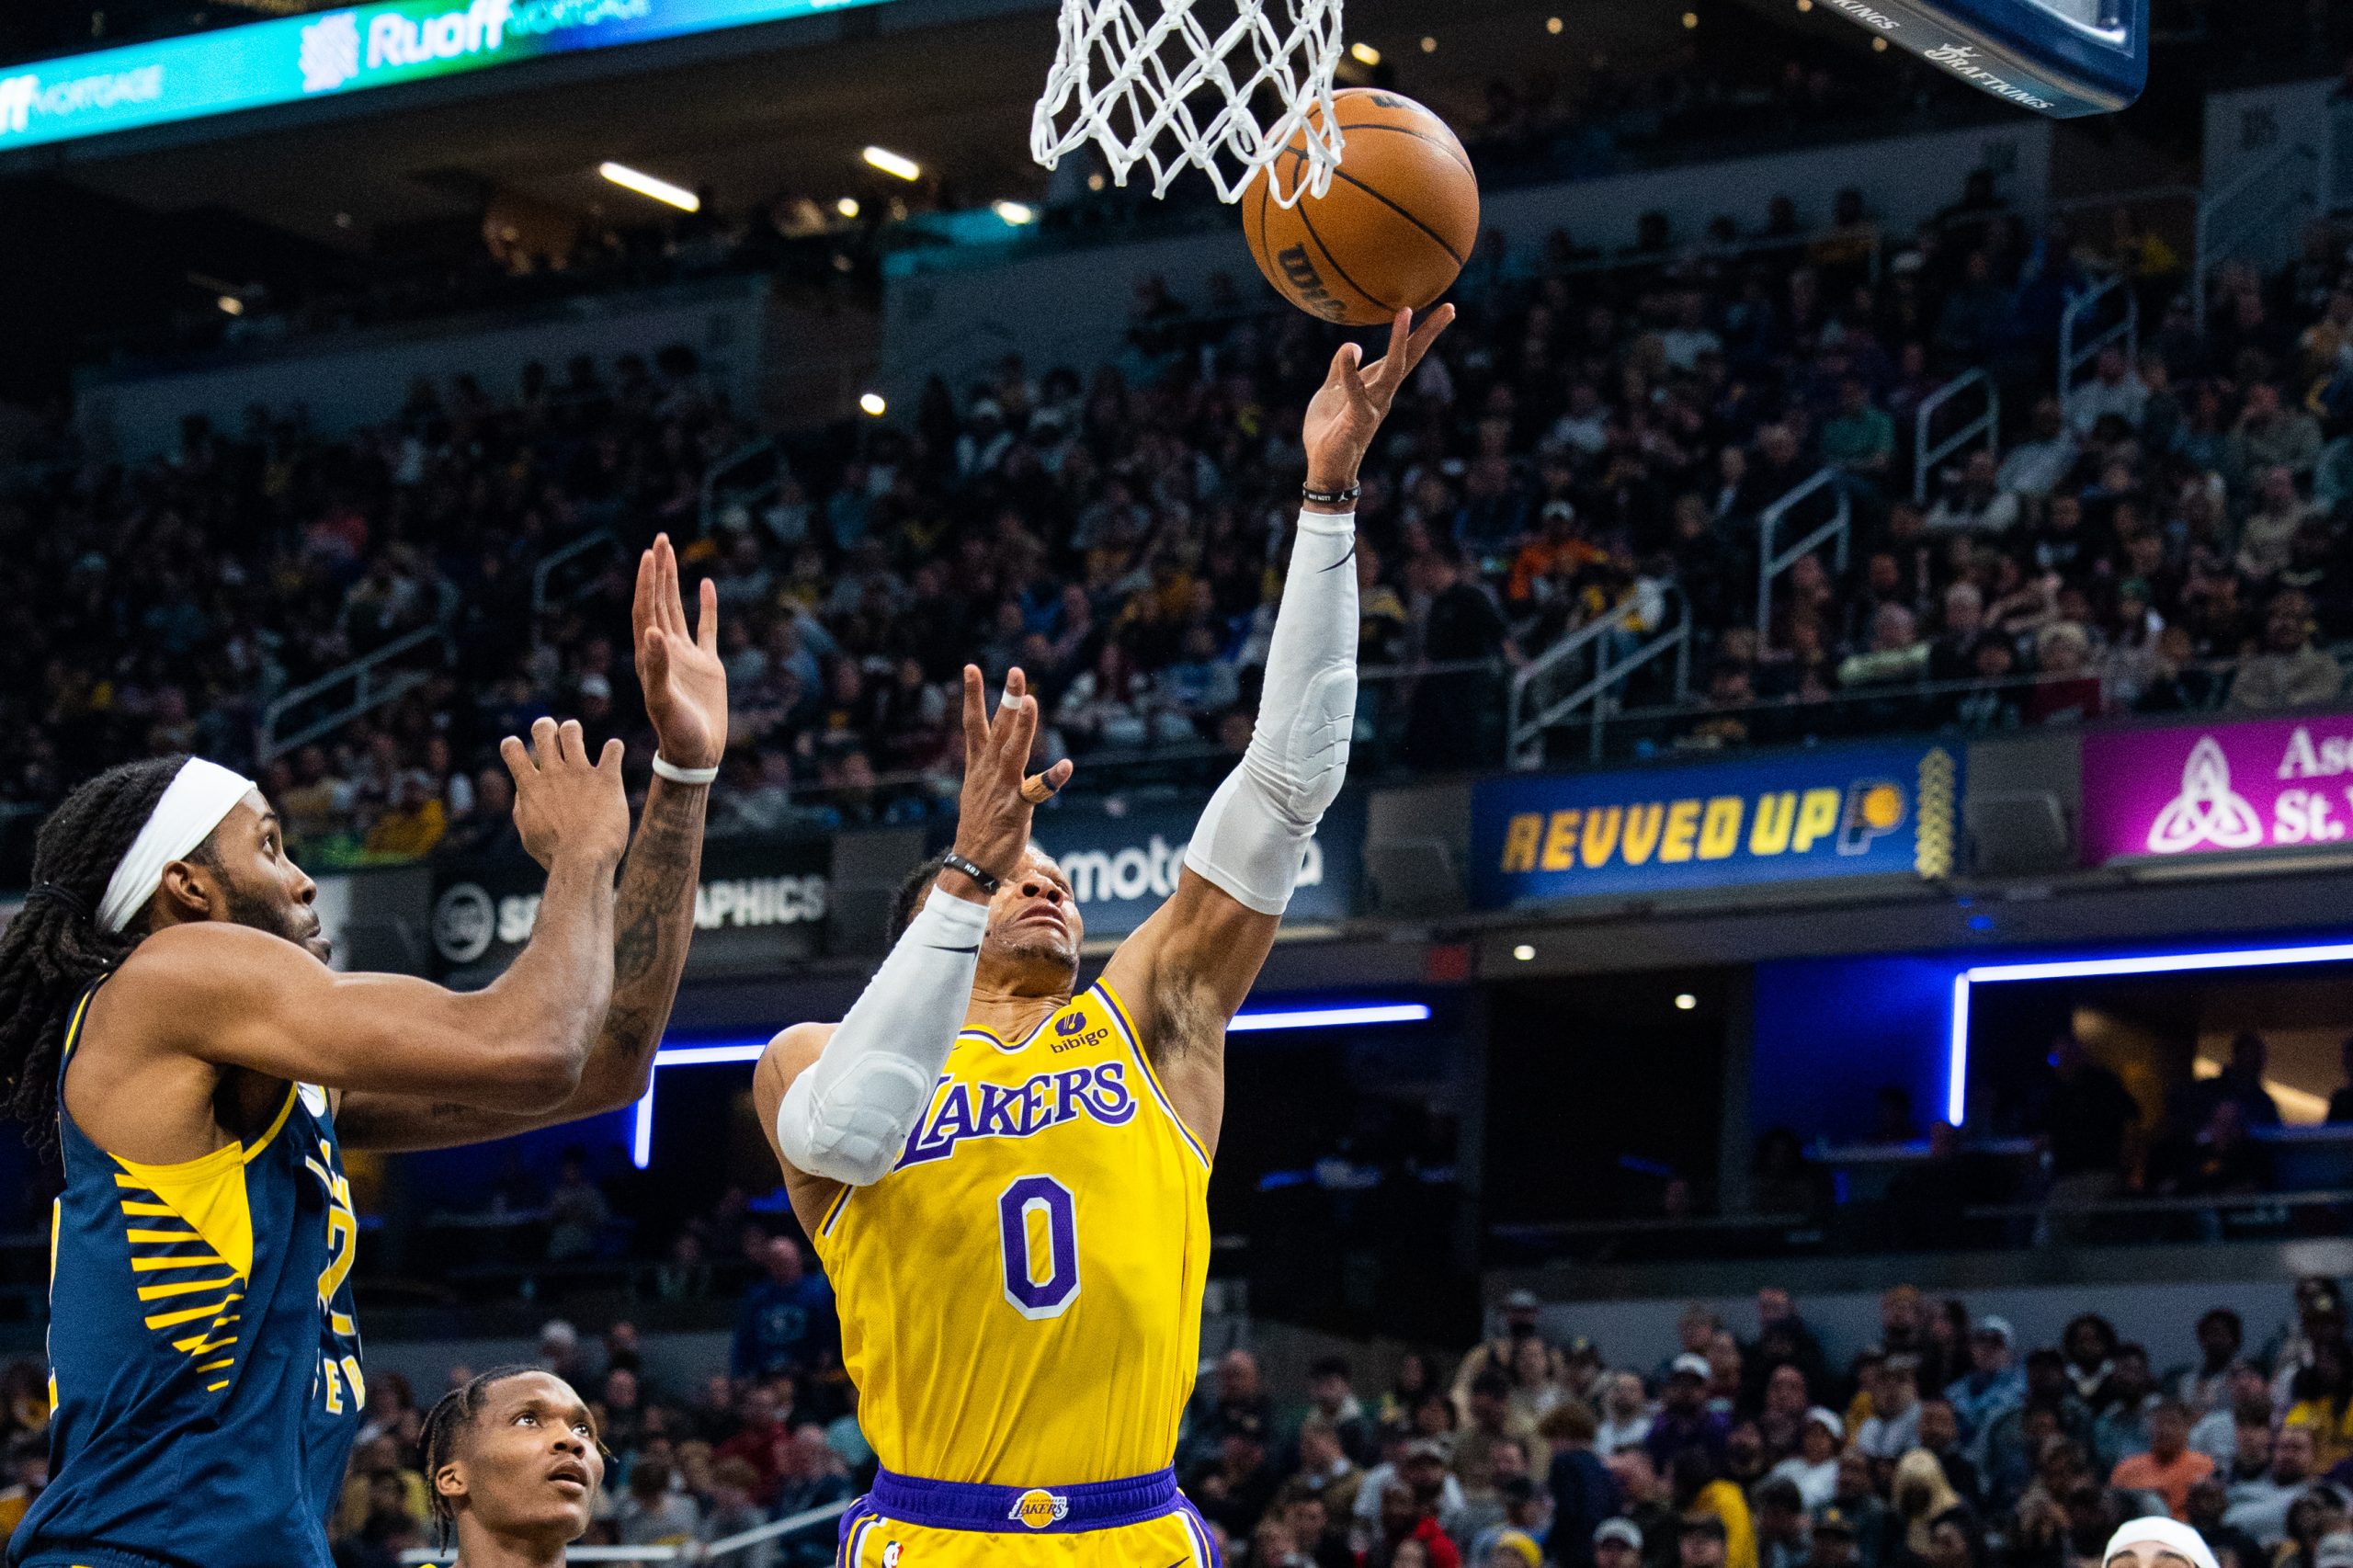 Feb 2, 2023; Indianapolis, Indiana, USA; Los Angeles Lakers guard Russell Westbrook (0) shoots while Indiana Pacers forward Isaiah Jackson (22) defends in the second half at Gainbridge Fieldhouse. Mandatory Credit: Trevor Ruszkowski-USA TODAY Sports